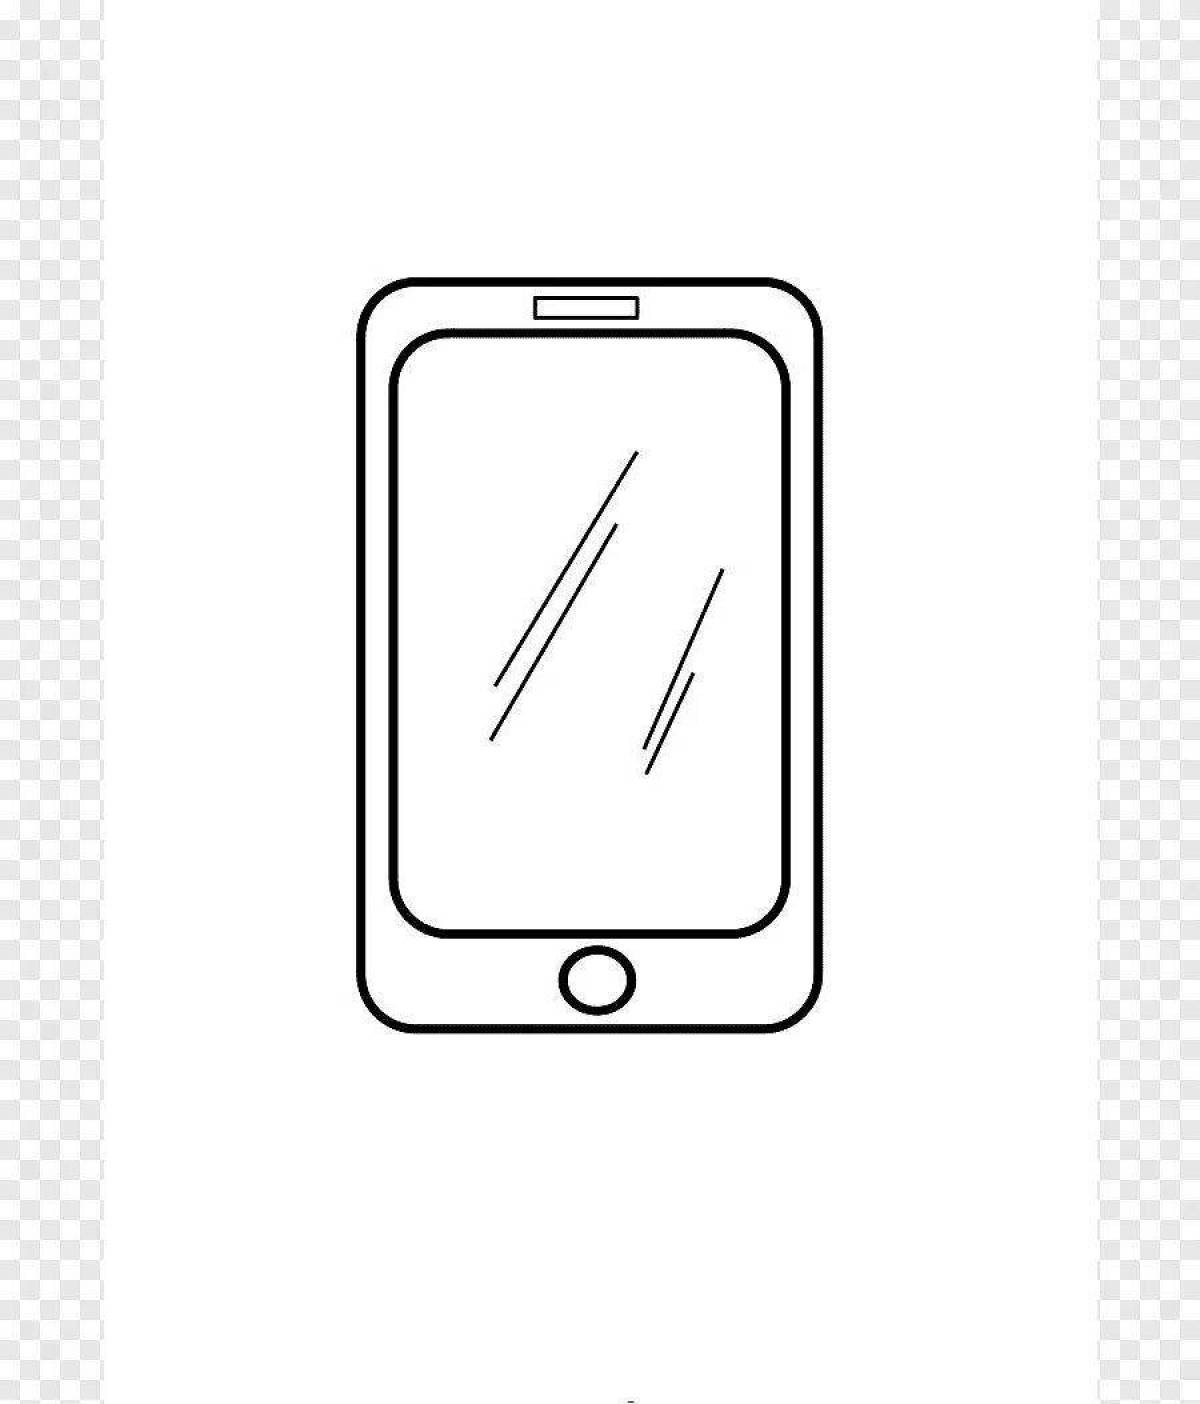 Cute phones and tablets coloring book